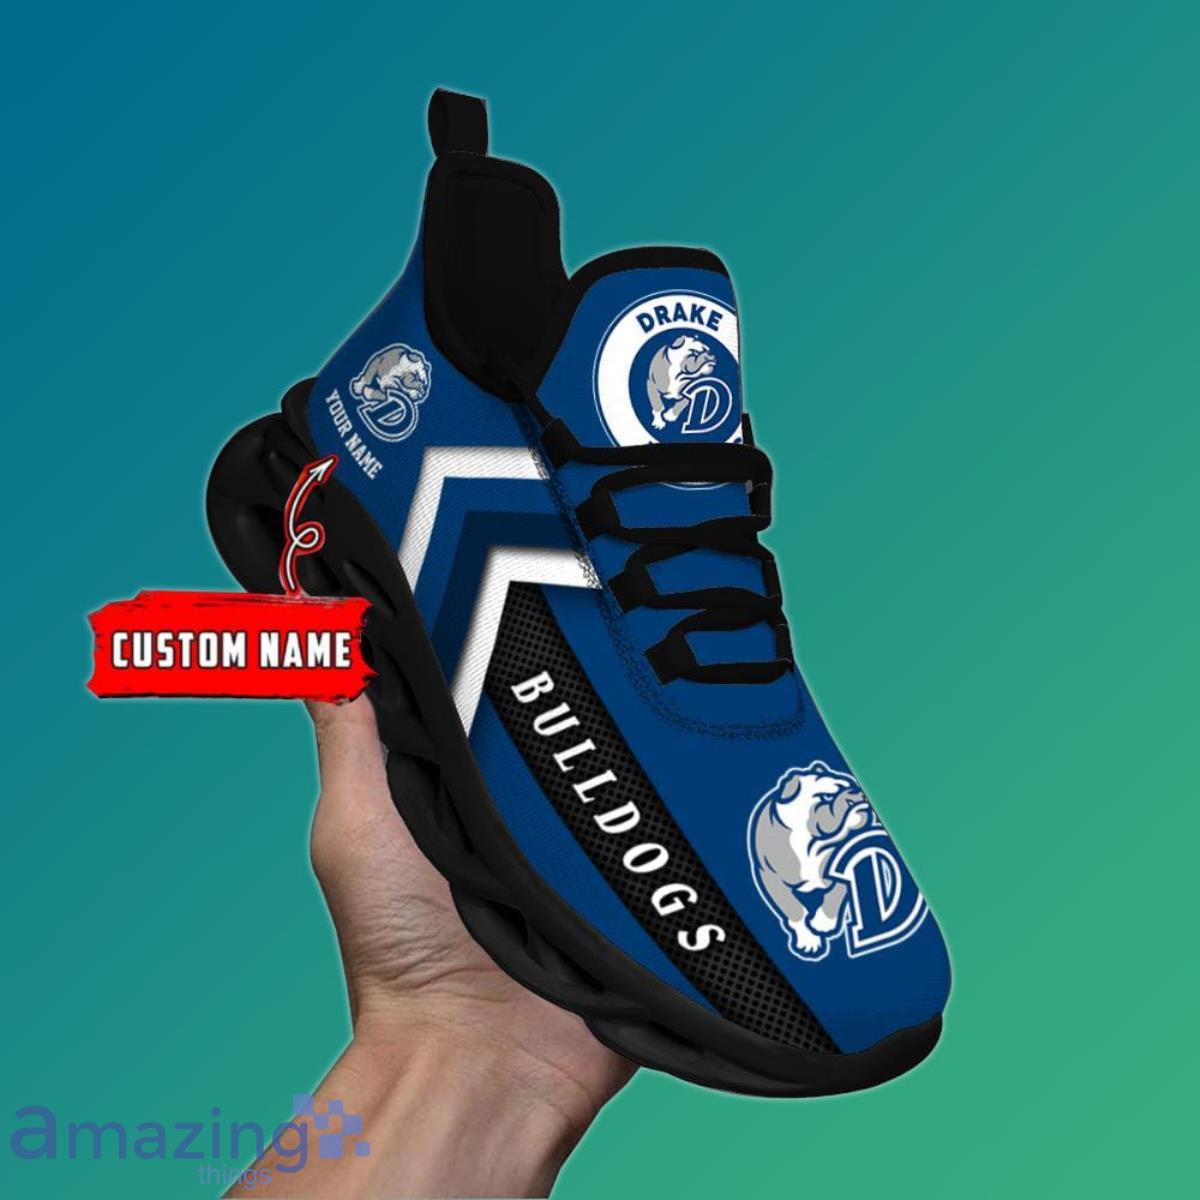 Drake Bulldogs Custom Name Max Soul Shoes Special Gift Product Photo 1